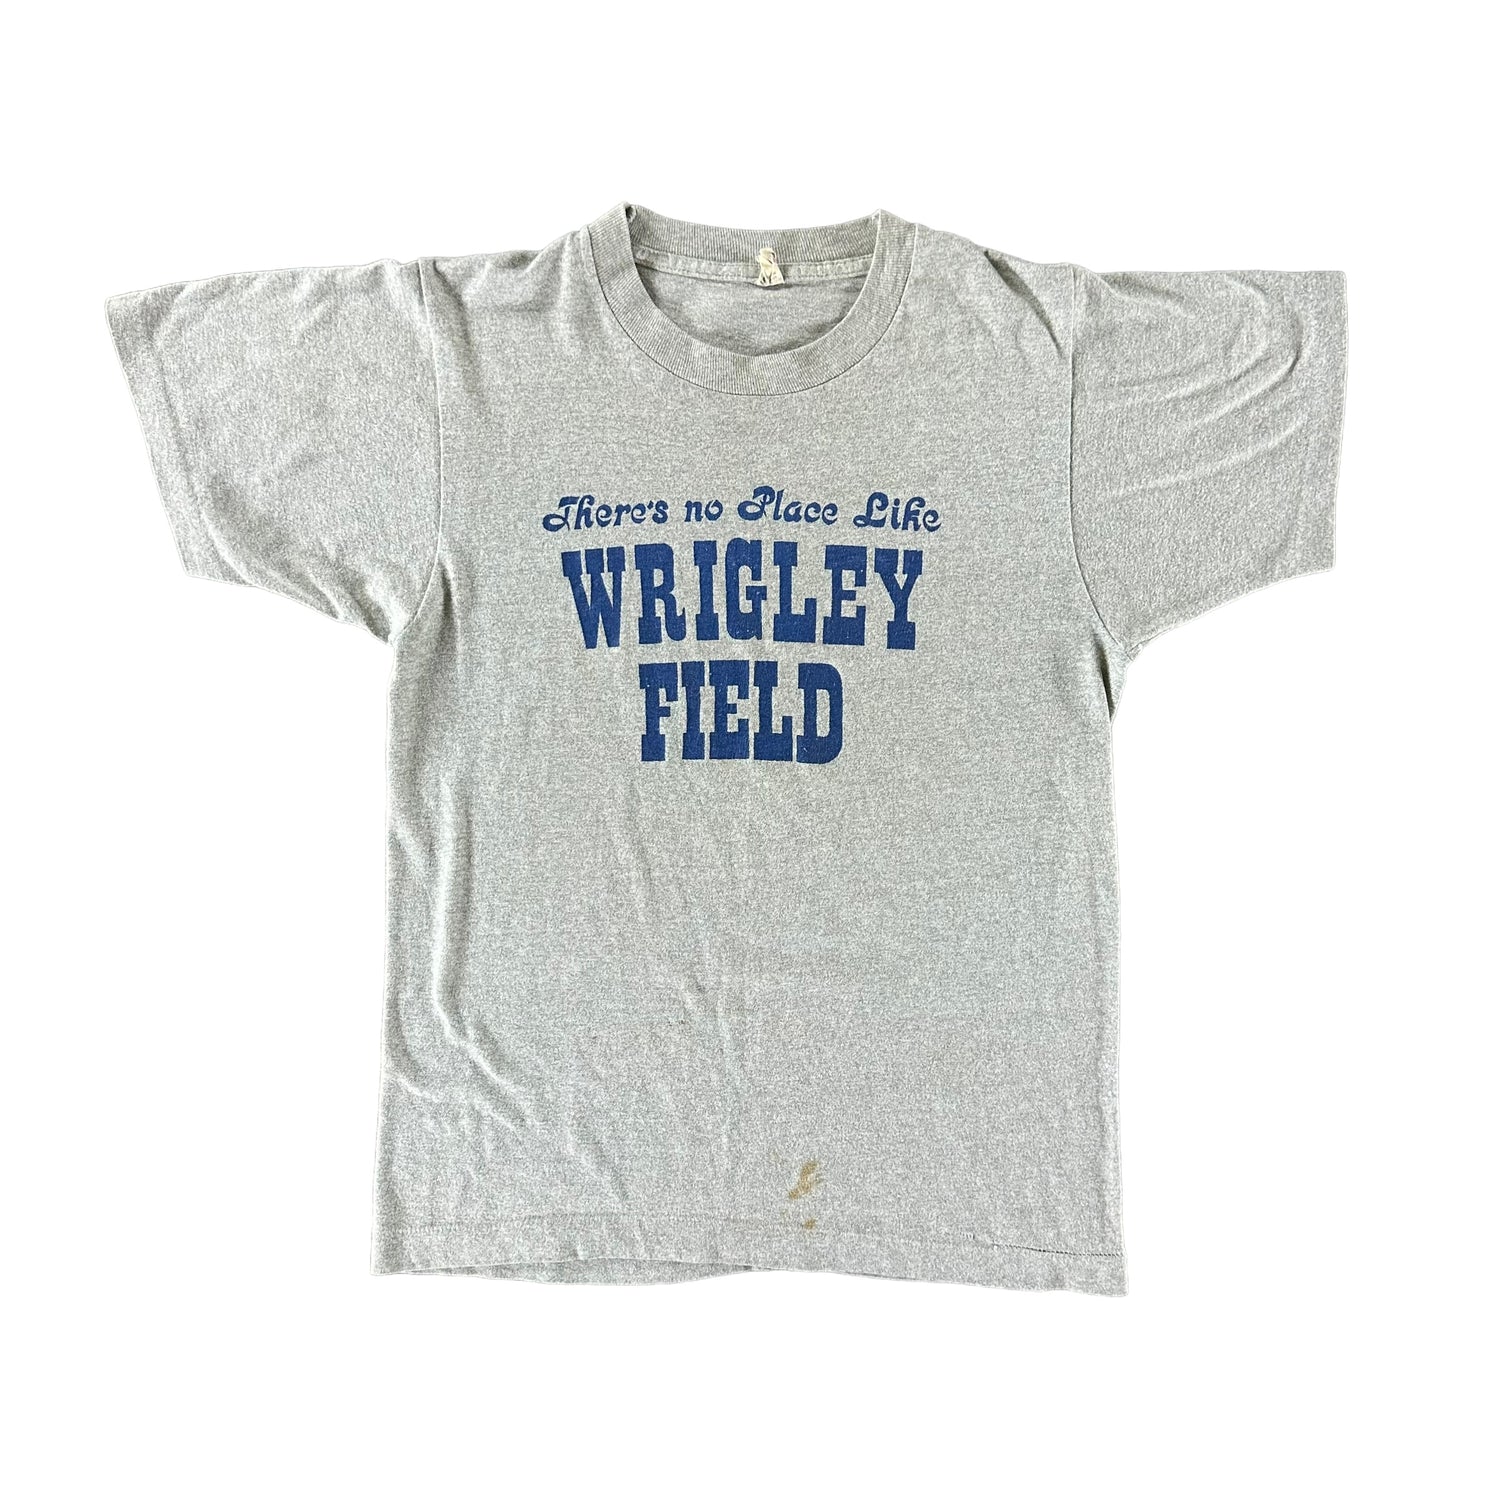 Vintage 1980s Wrigley Field T-shirt size Small